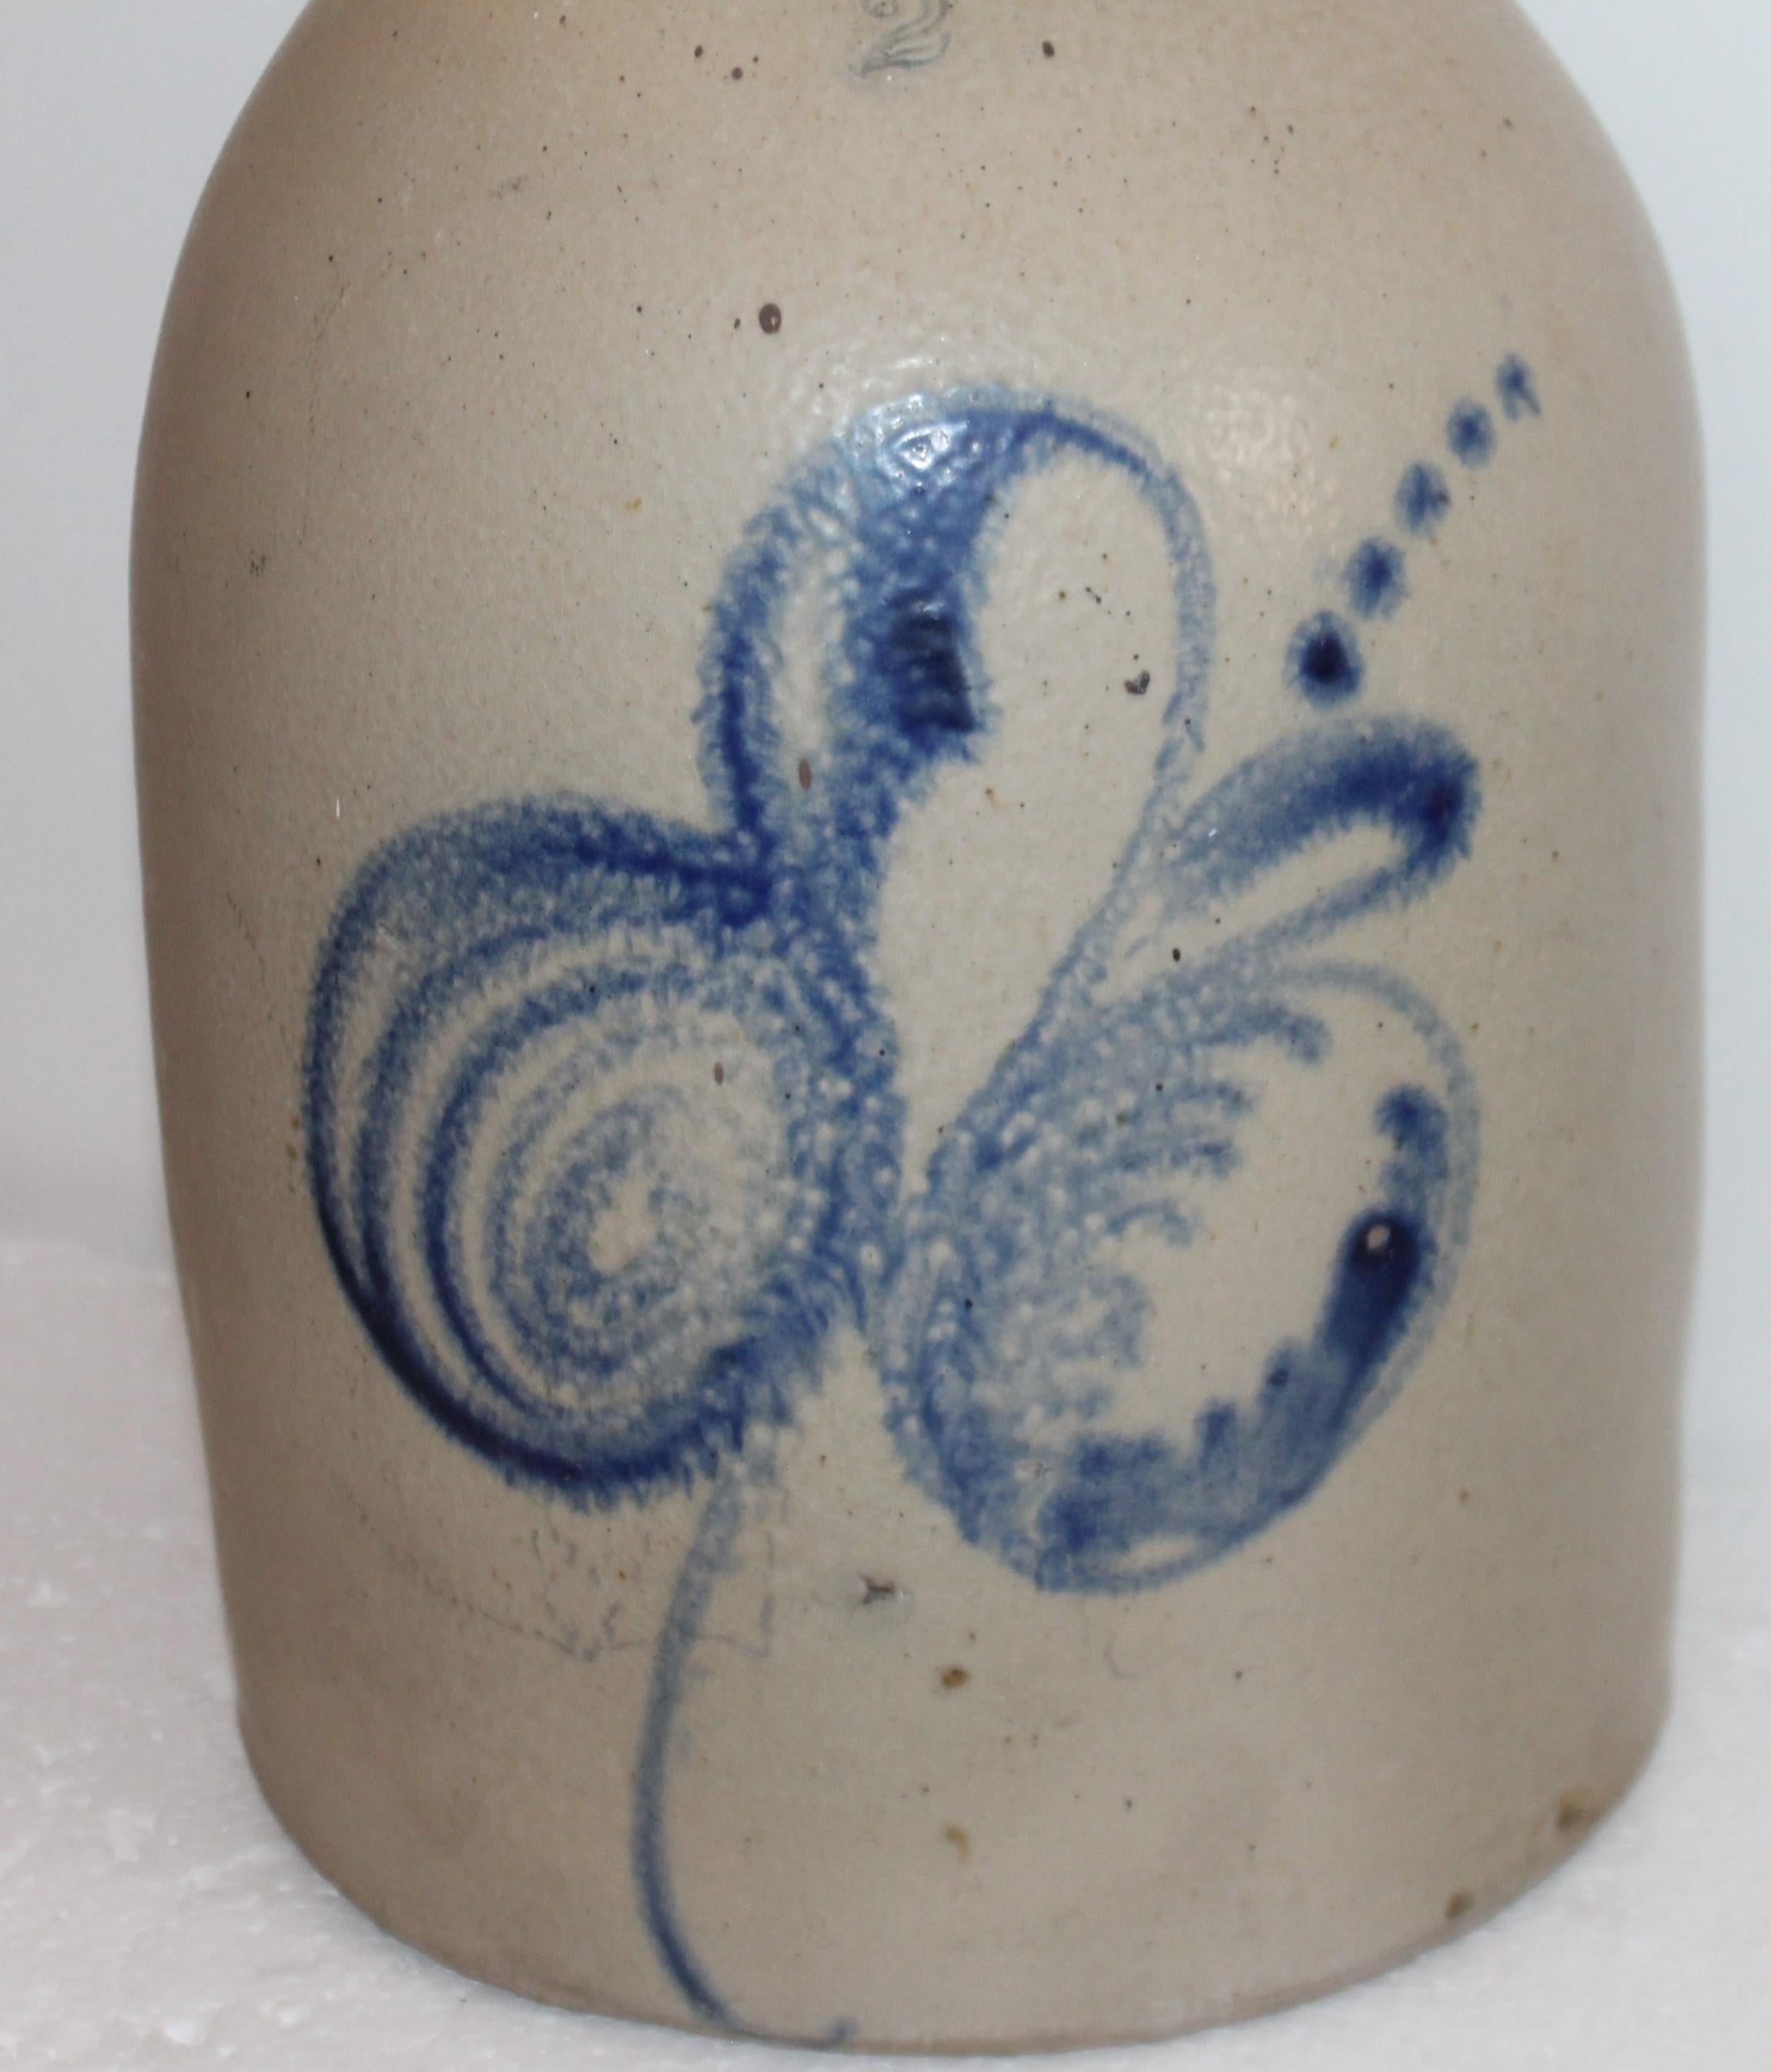 This 19th century blue decorated stoneware jug has a interesting design and is signed by the maker J.S.Tamaka.